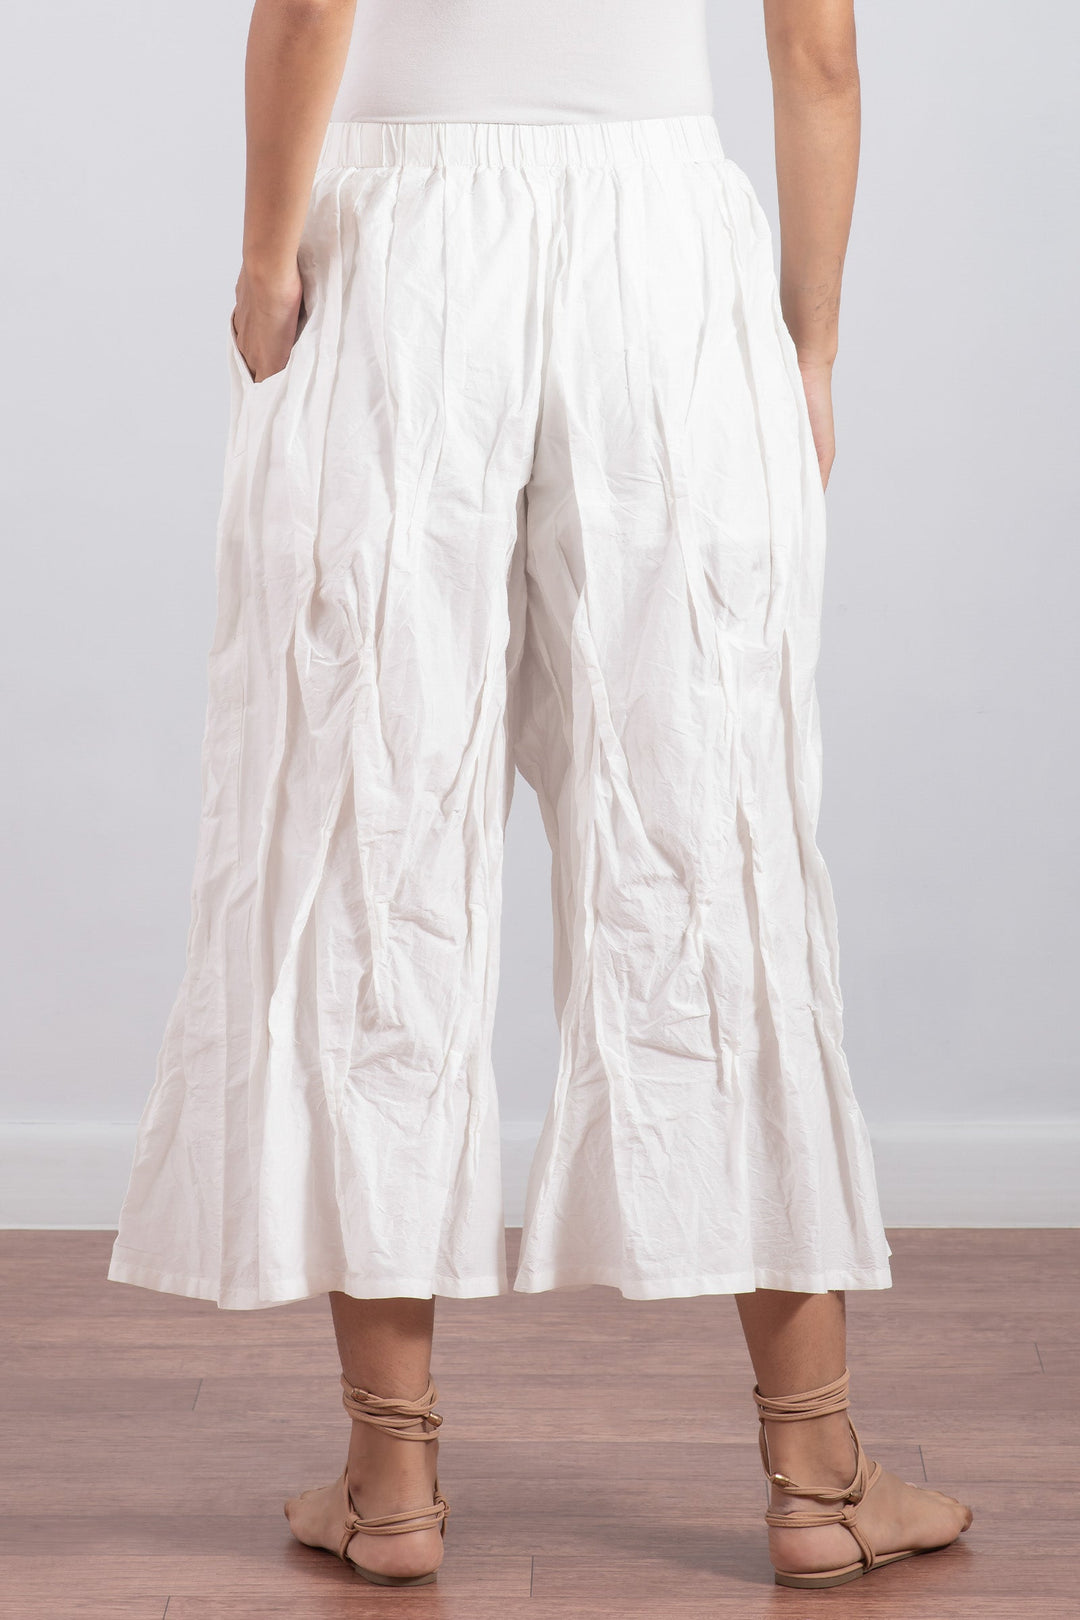 DYED COTTON SILK HEAVY VOILE WAVY TUCKED PANTS - dh1635-wht -